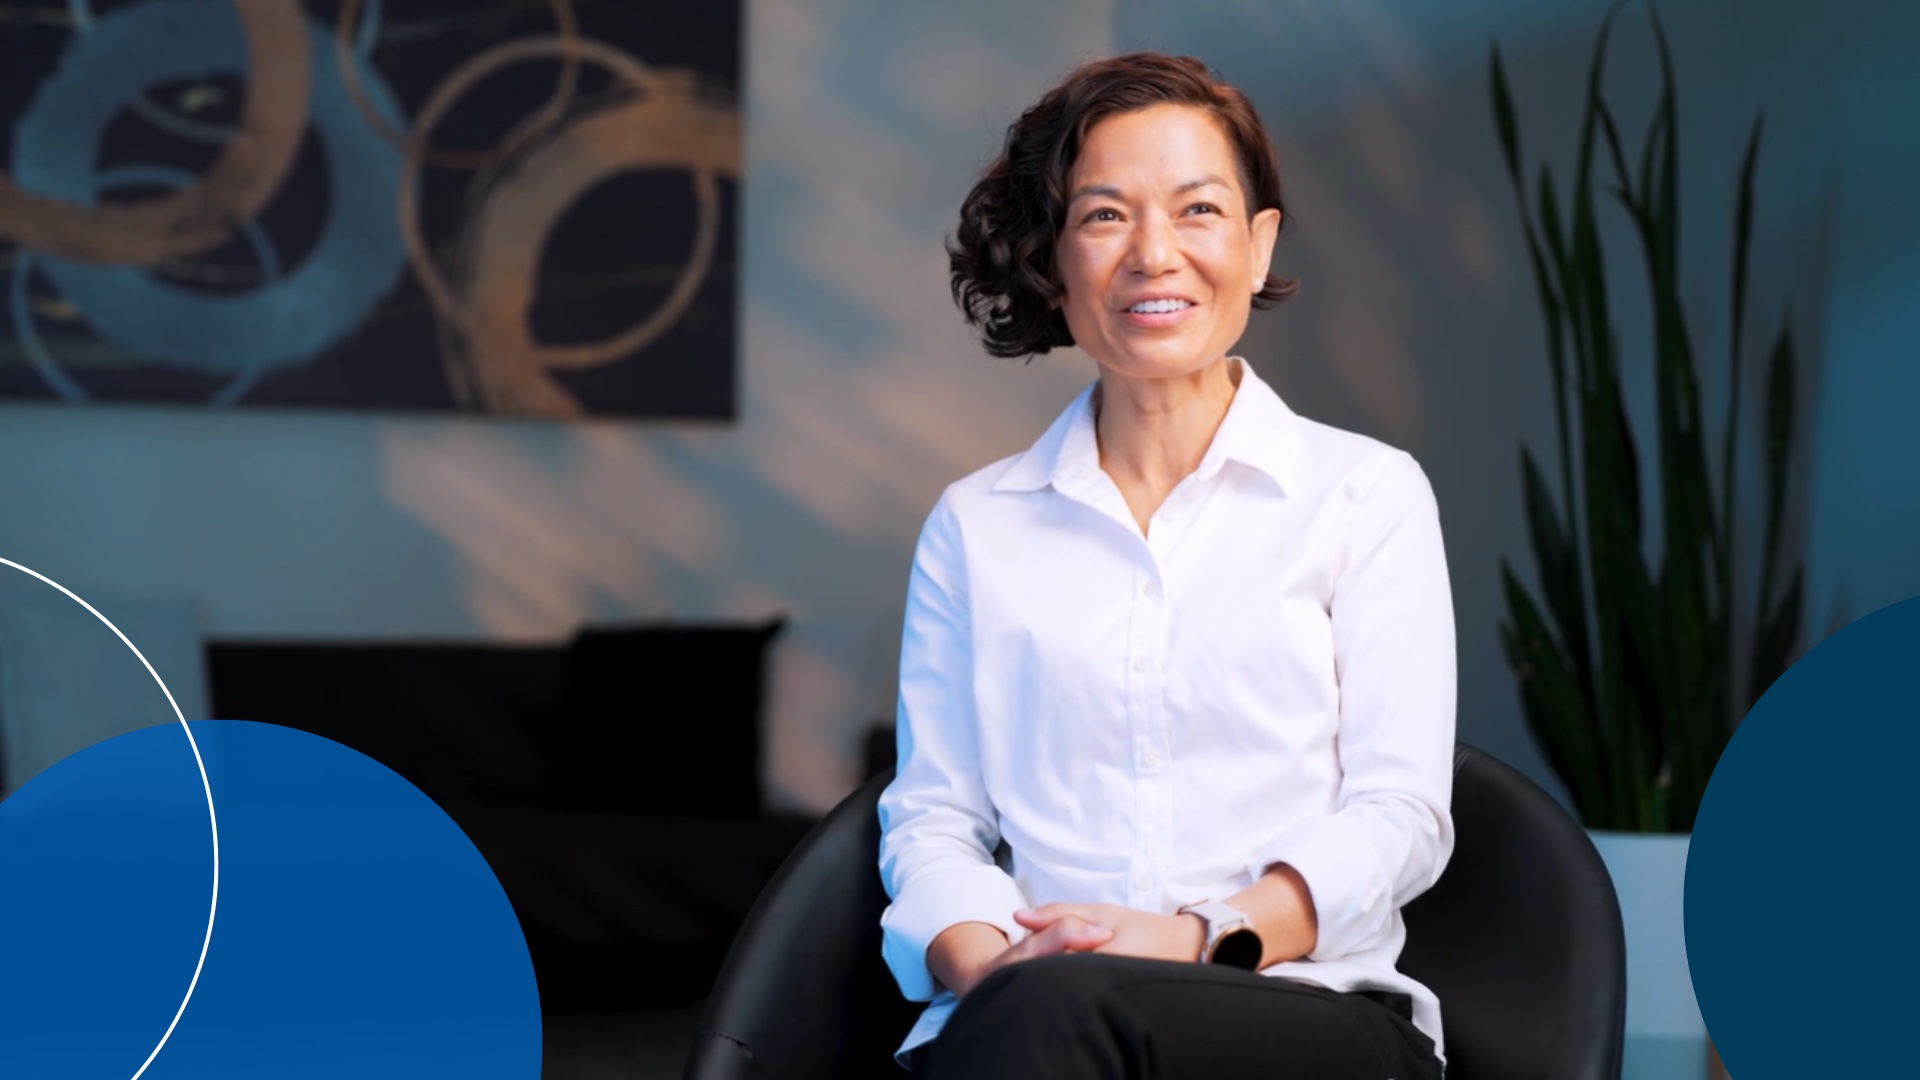 Dr. Angela Toy shares her experience with her practice expansion